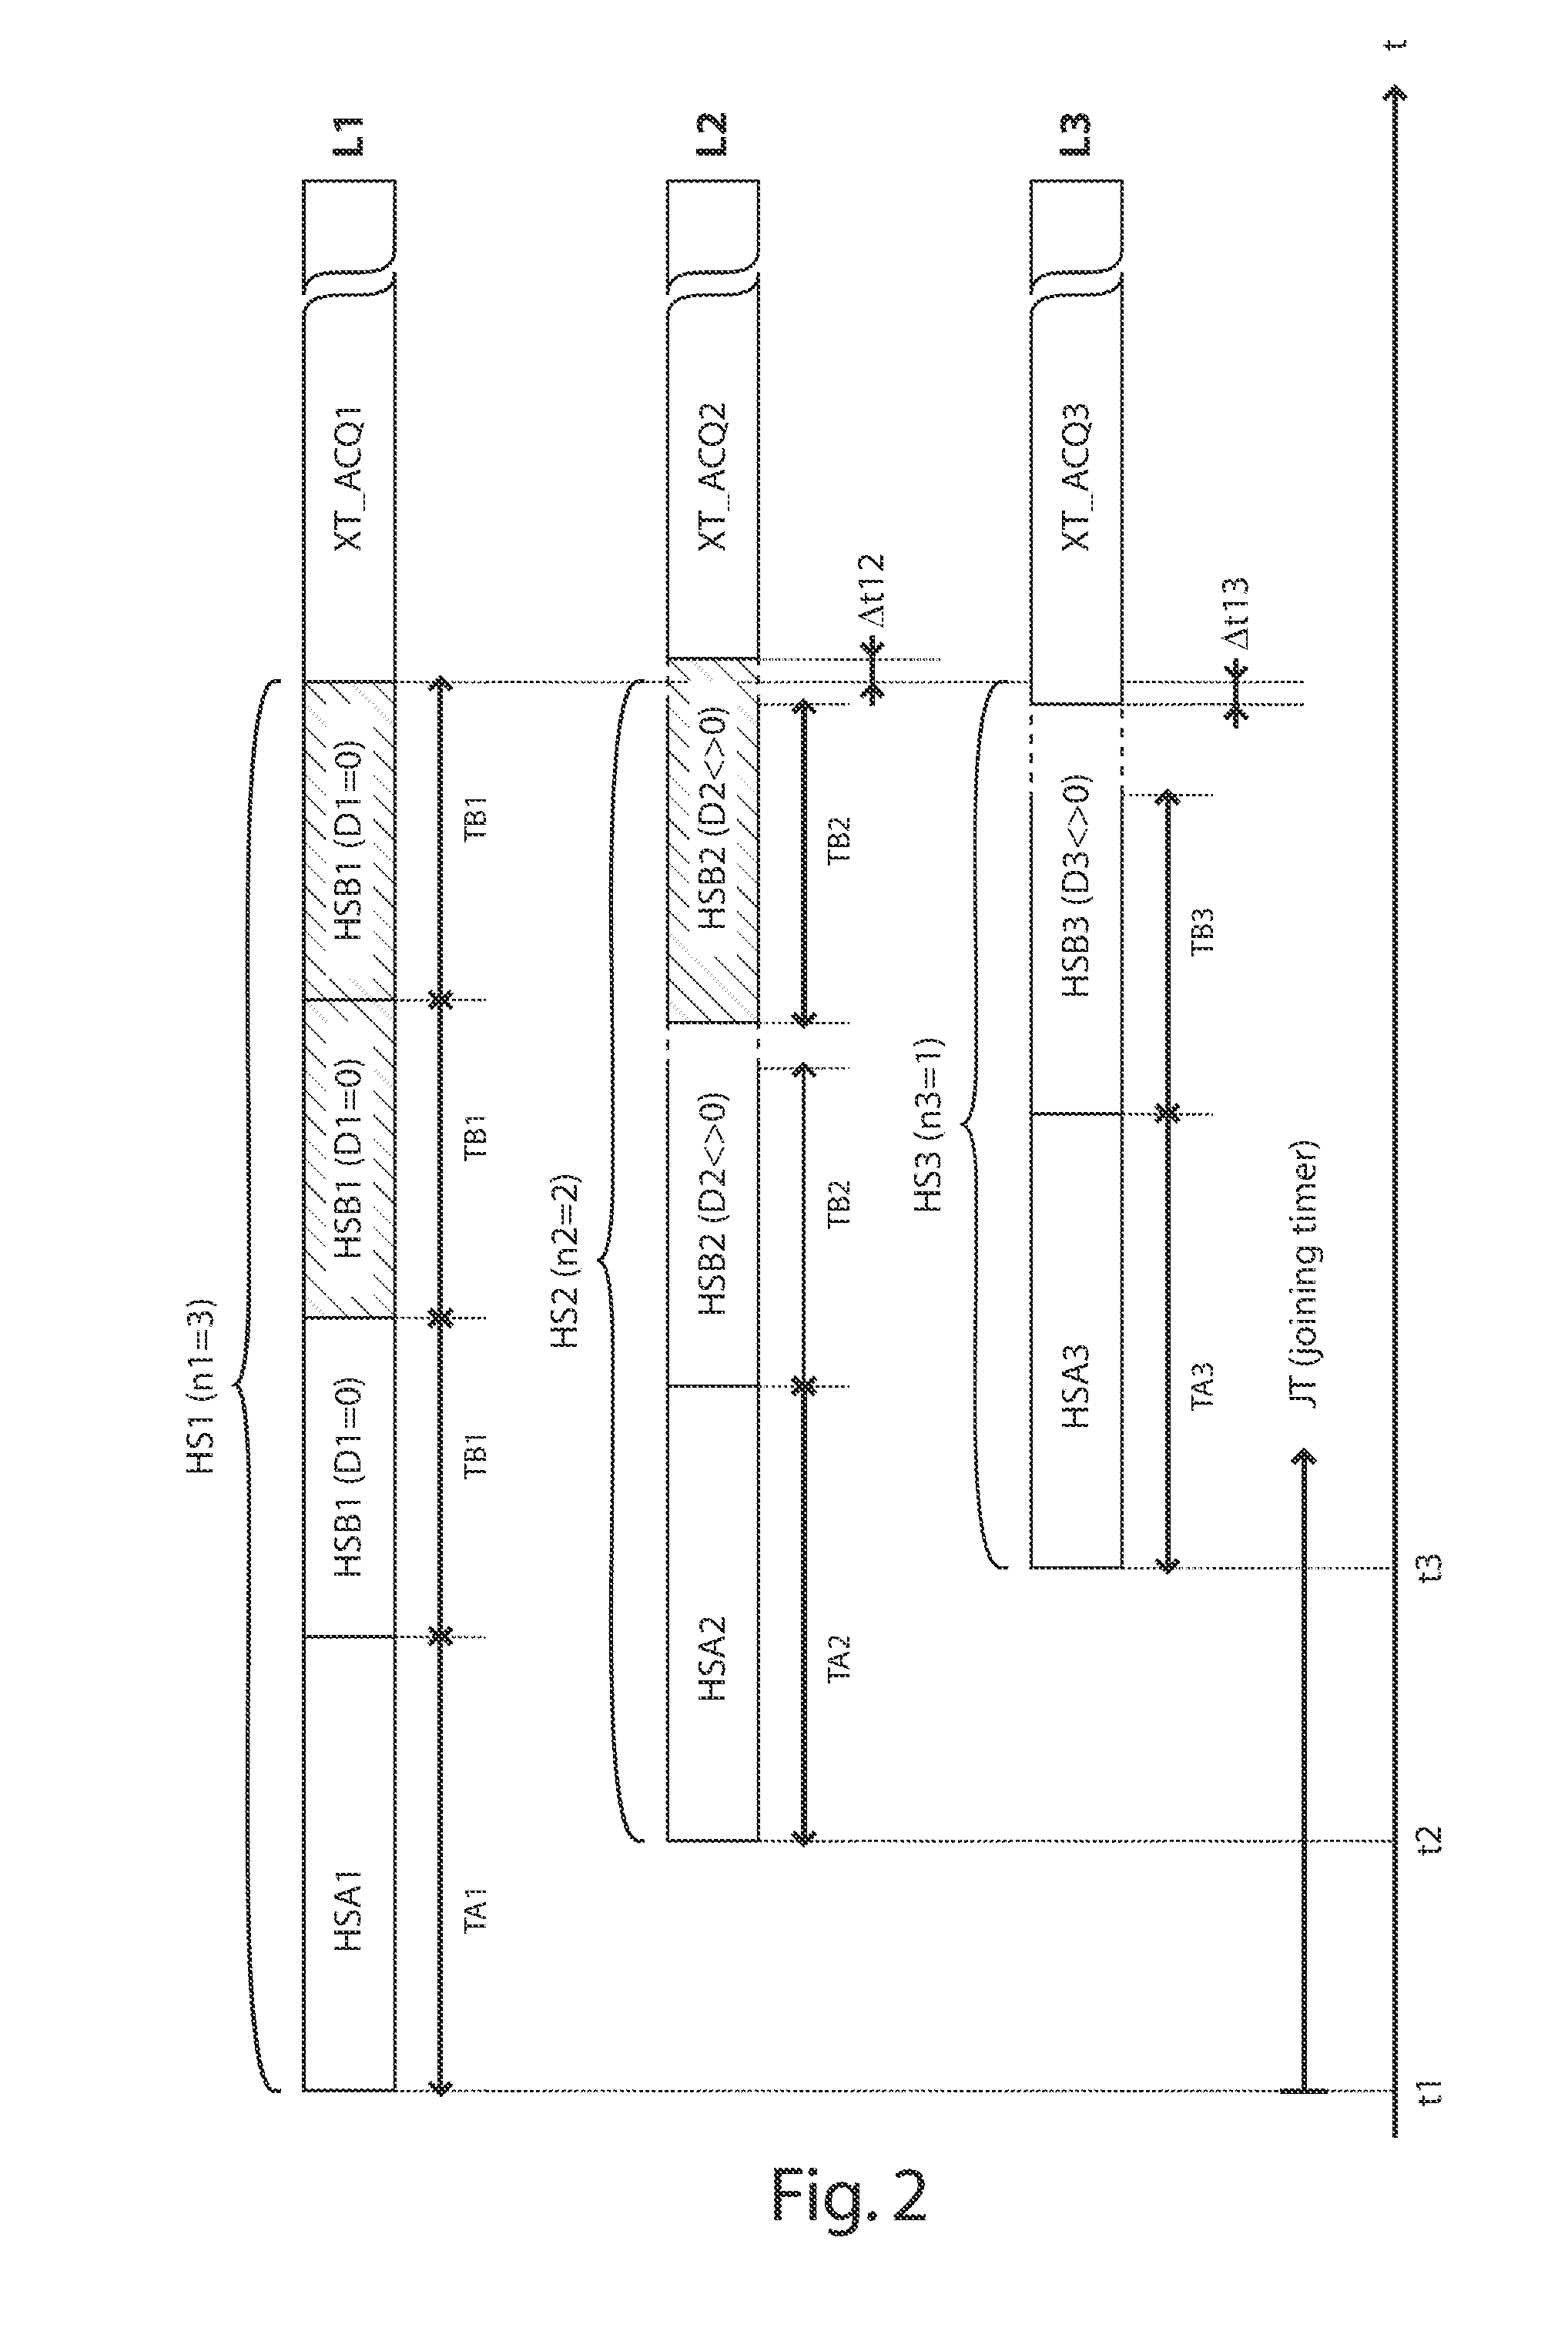 Time-alignment of crosstalk acquisition phases between multiple joining lines